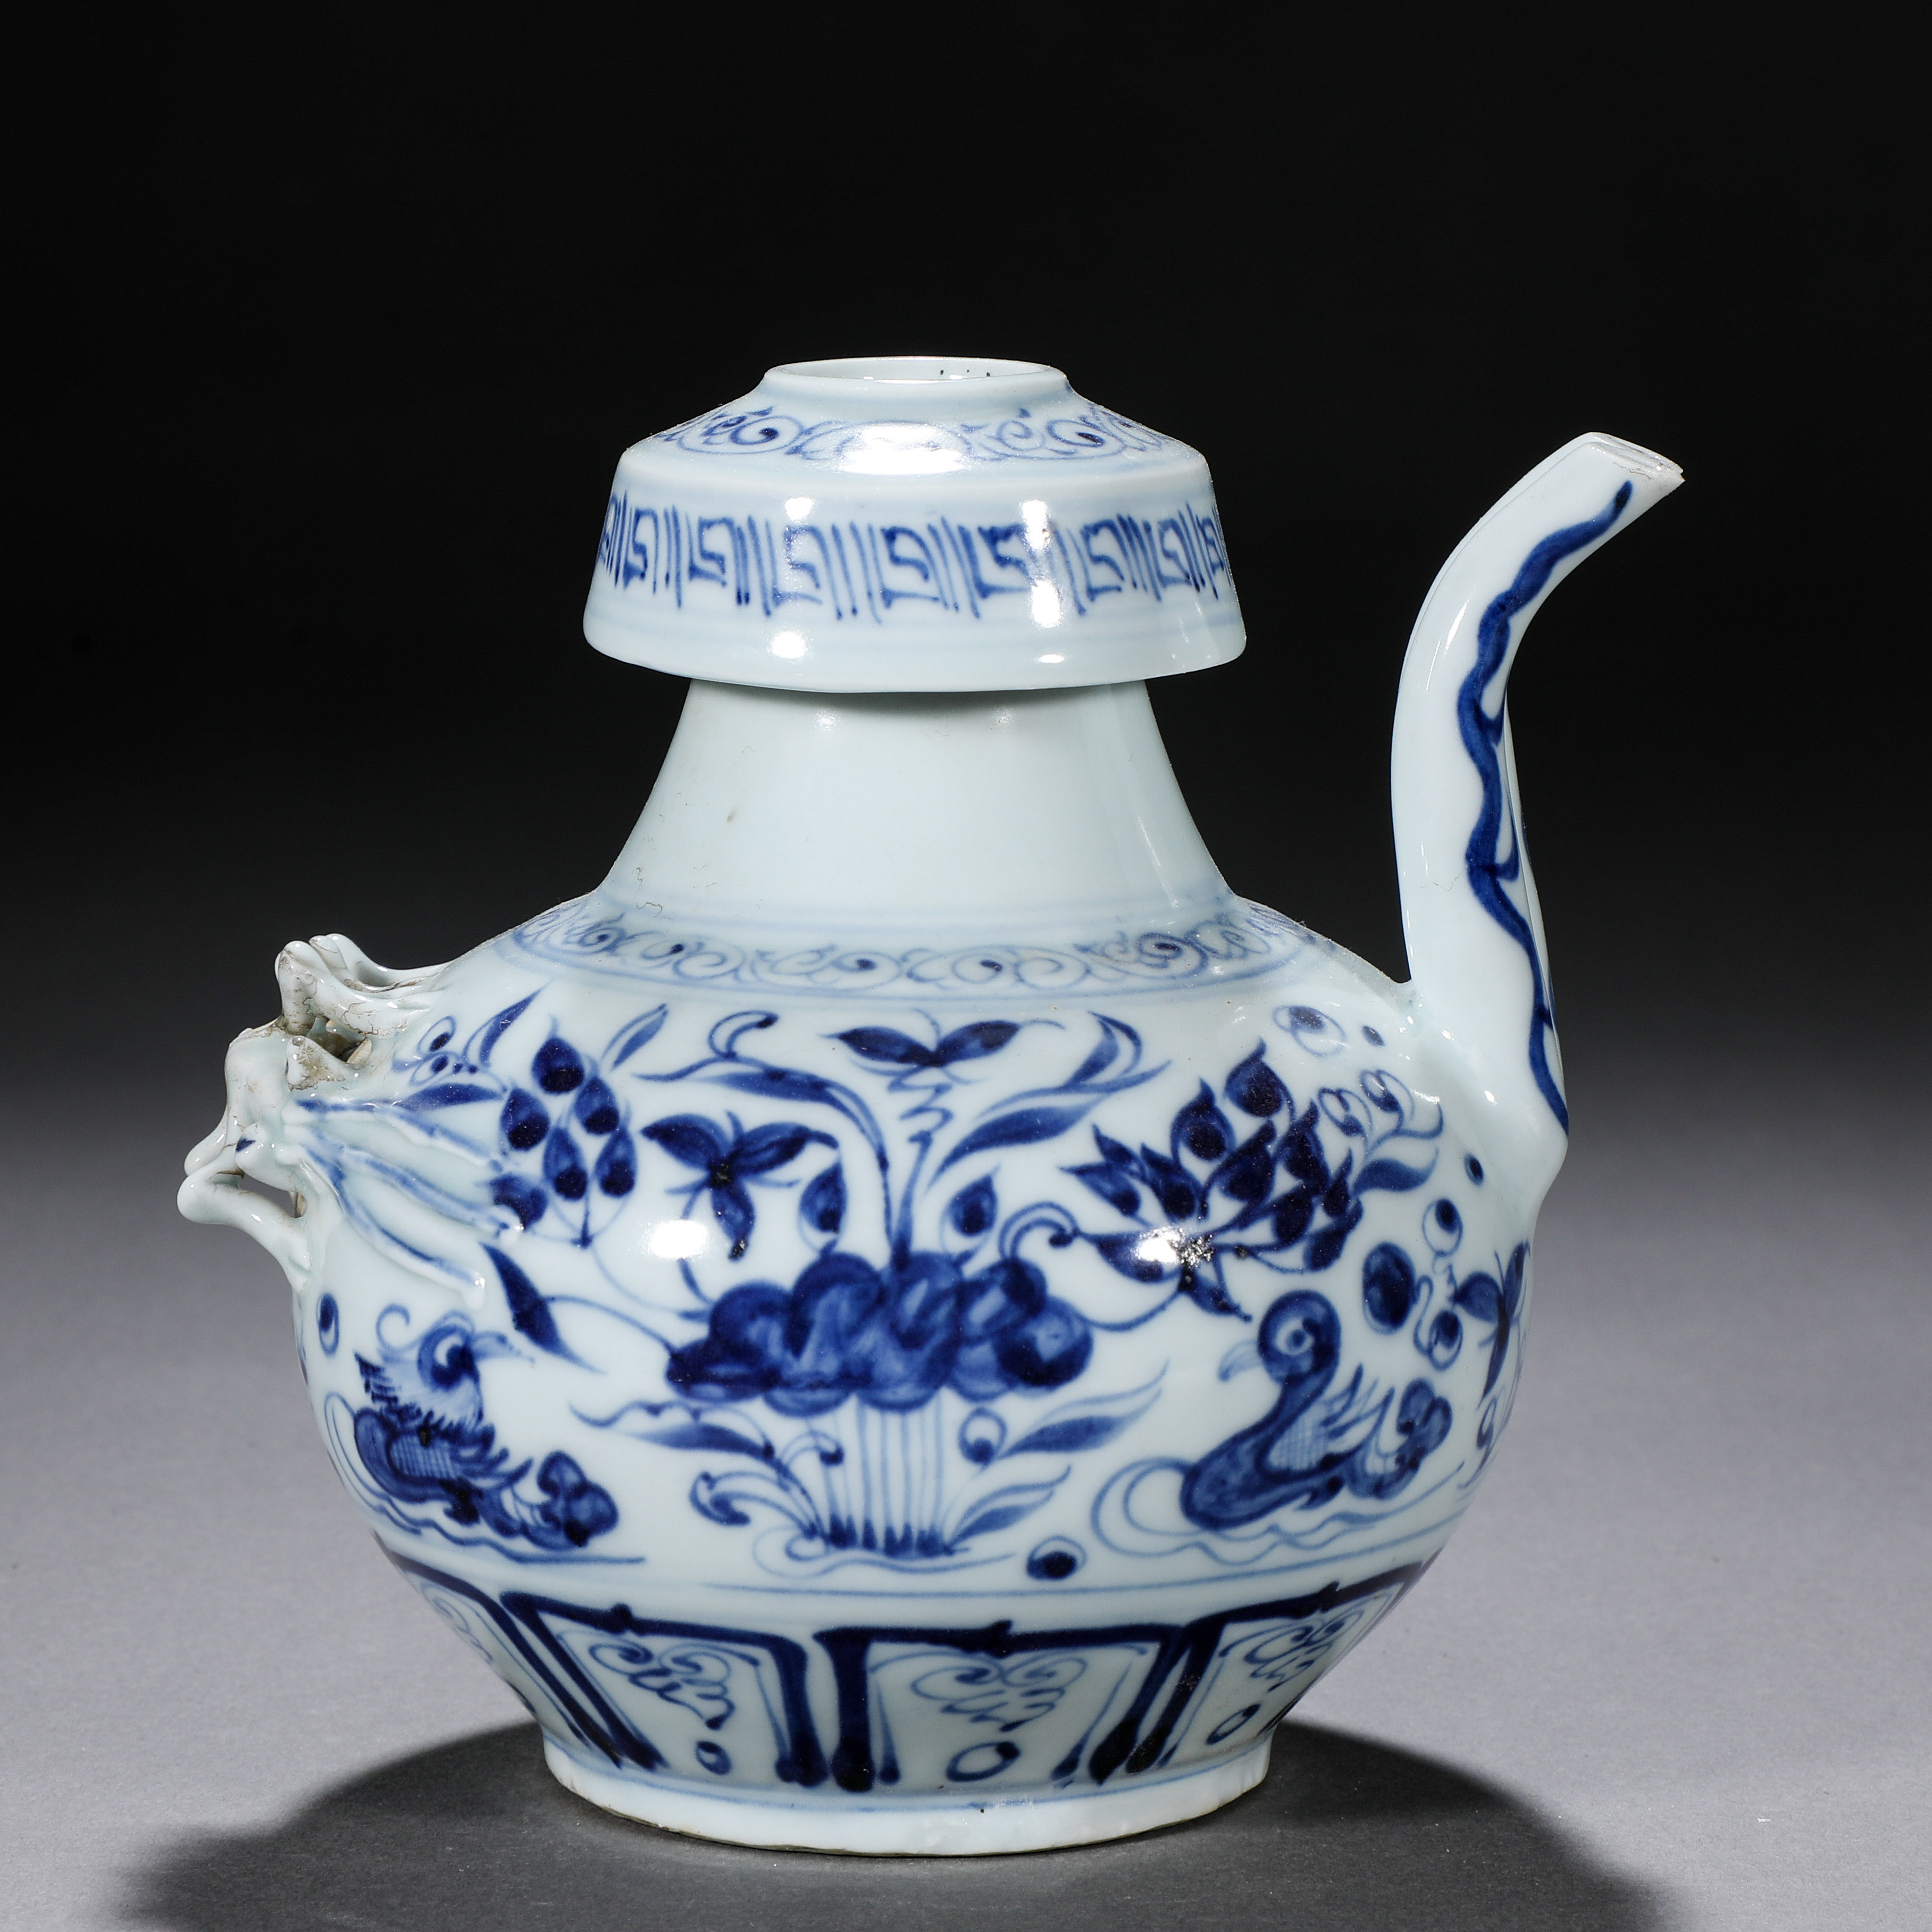 A Chinese Blue and White Lotus Pond Ewer